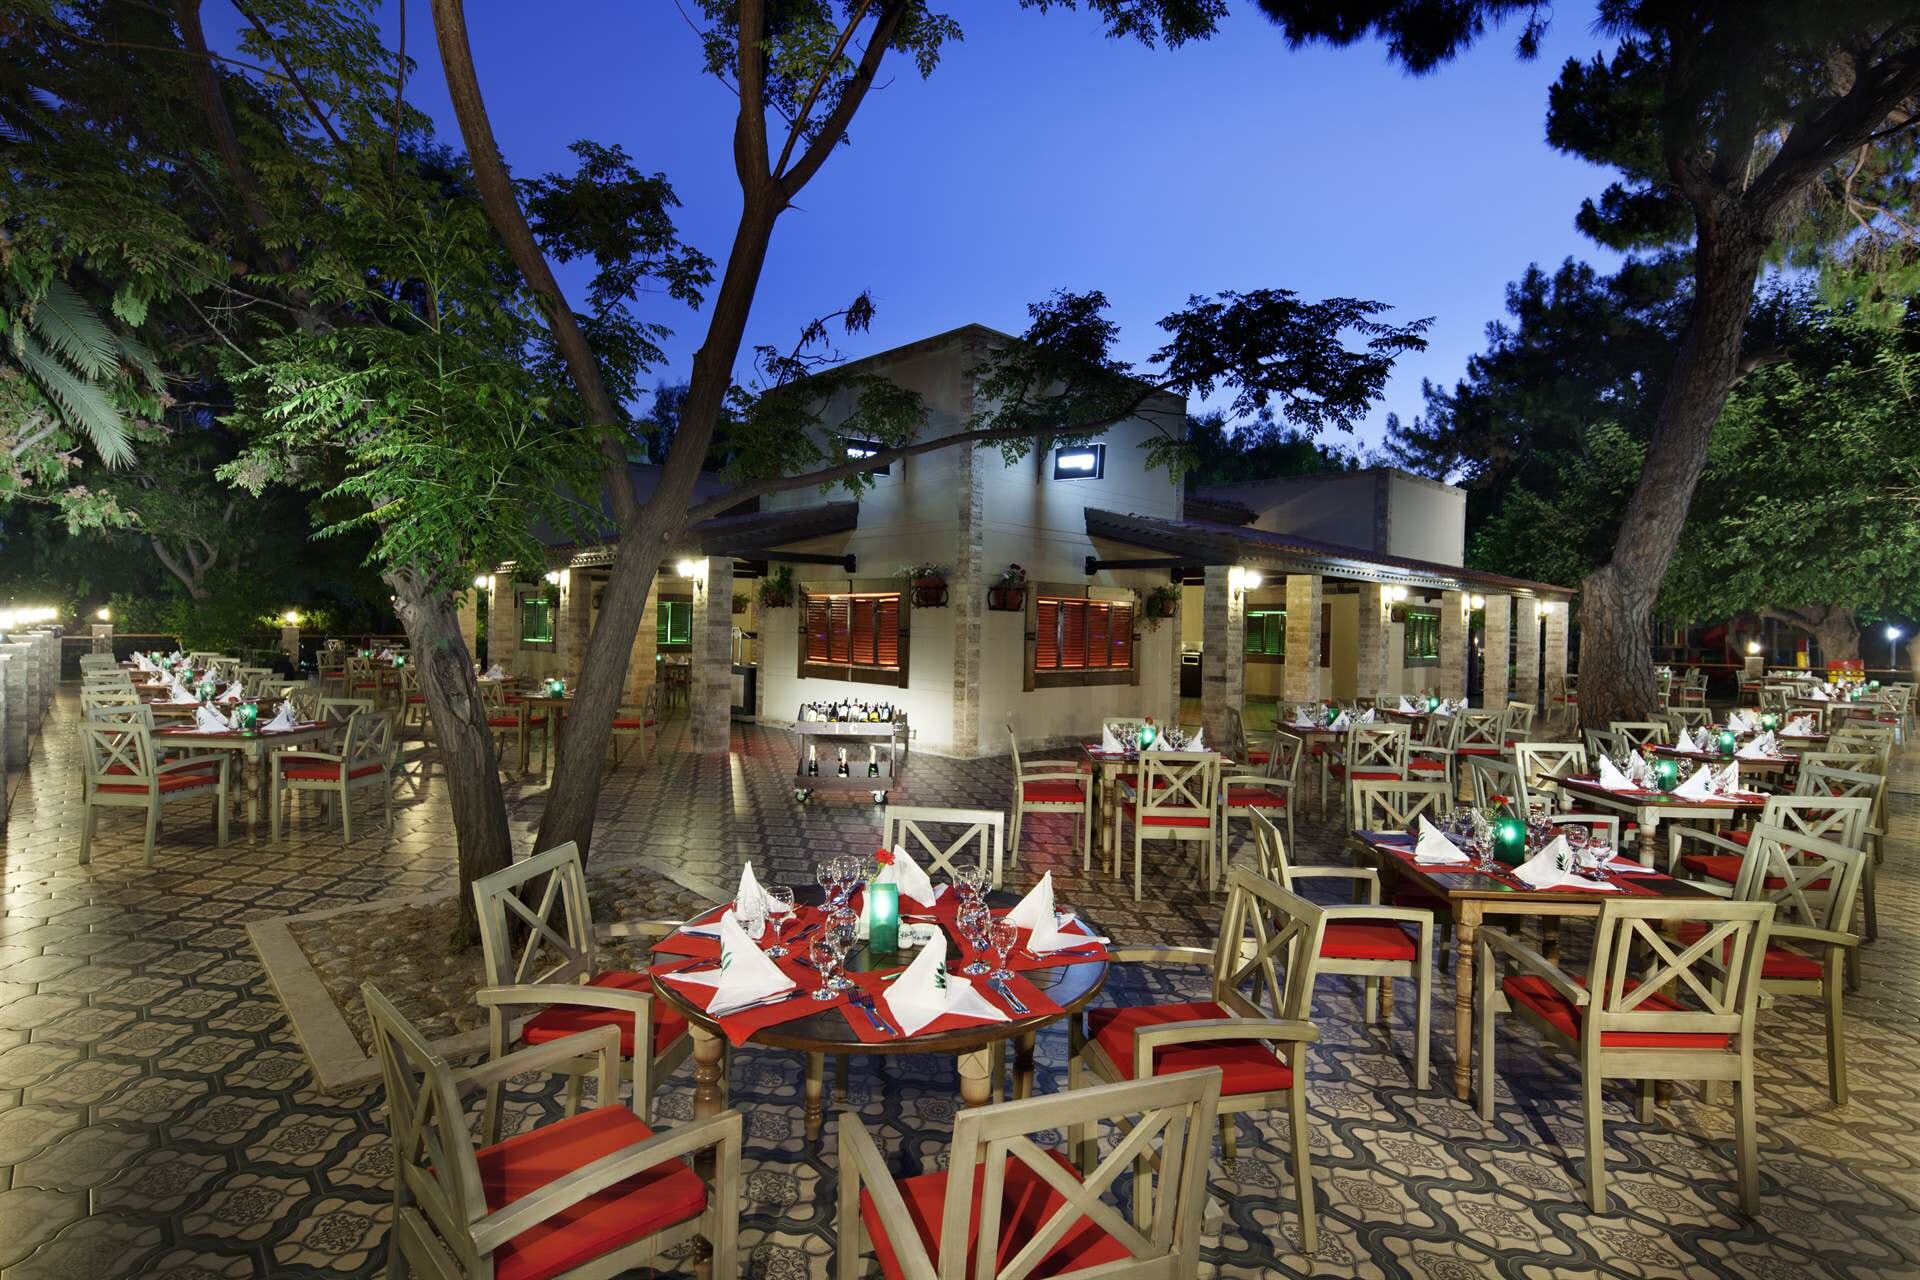 We bring the cuisine of Italy to your table with Meditarranean garden view.